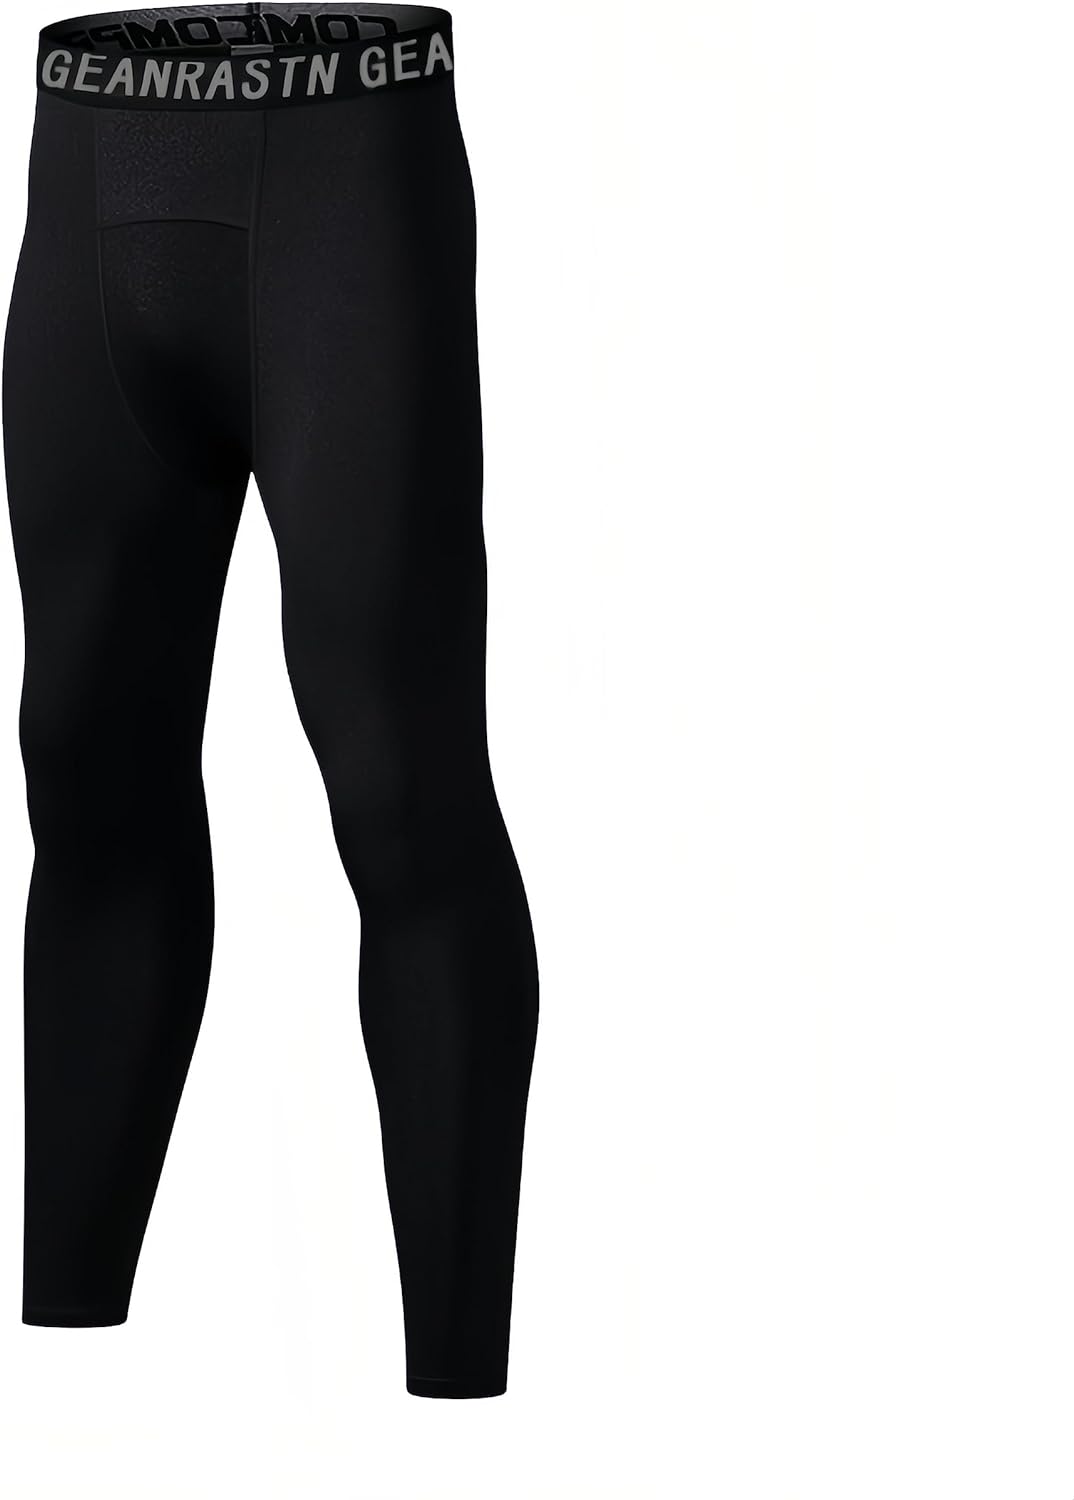 4 or 3 Pack Youth Boys' Compression Leggings Tights Athletic Pants